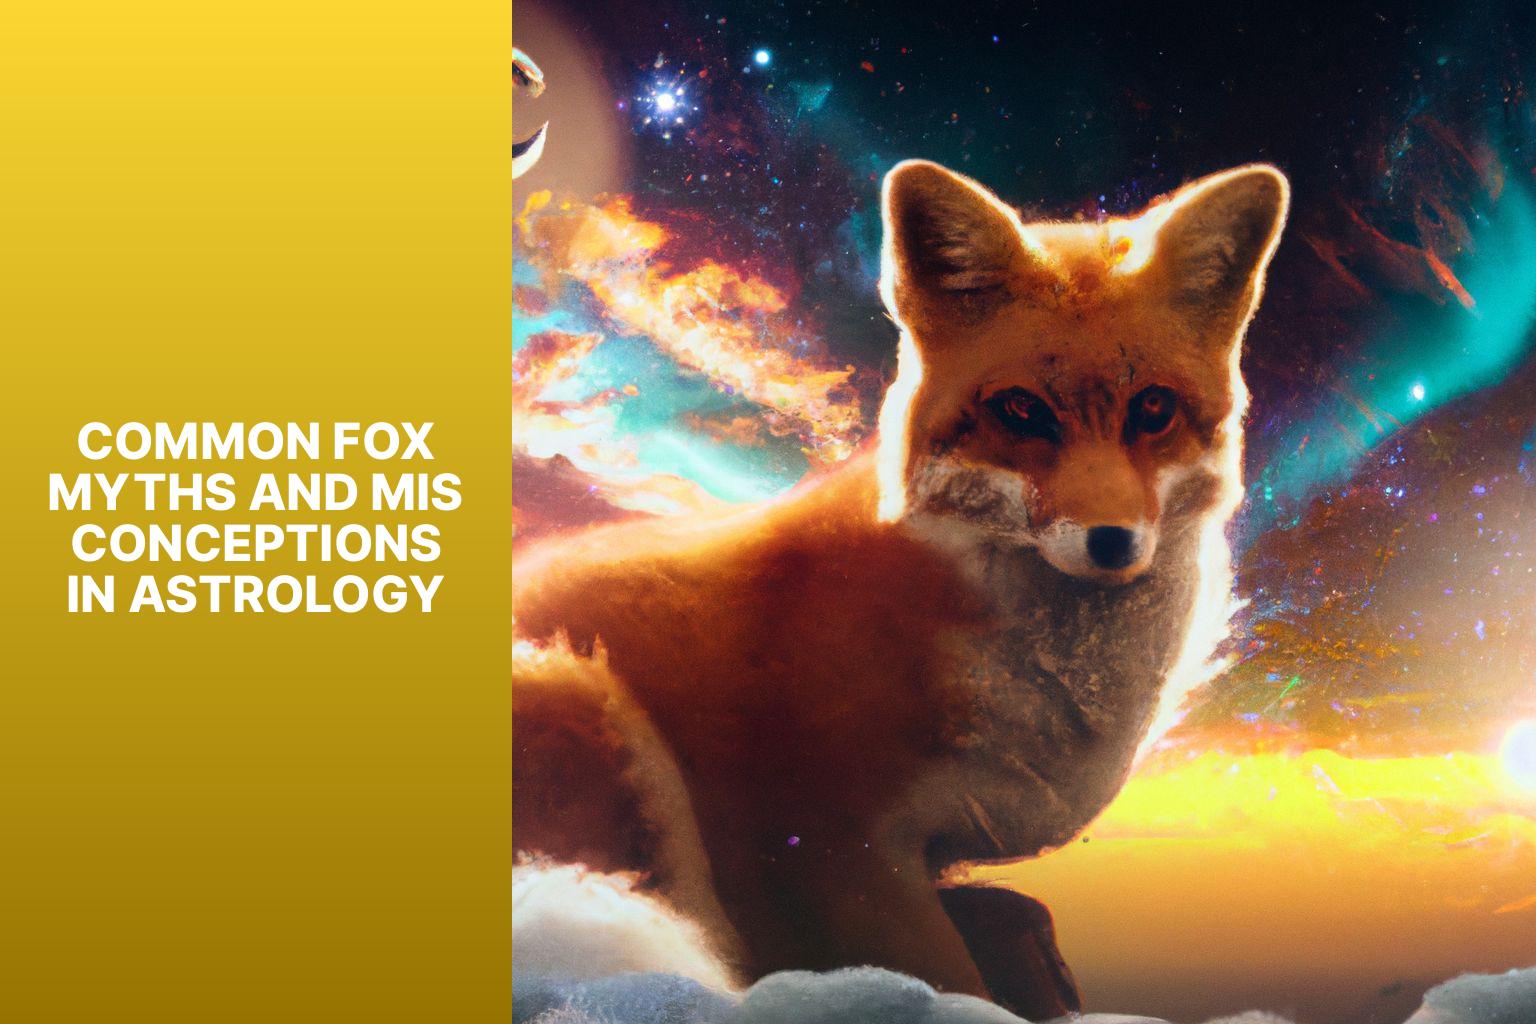 Common Fox Myths and Misconceptions in Astrology - Fox Myths in Astrology 